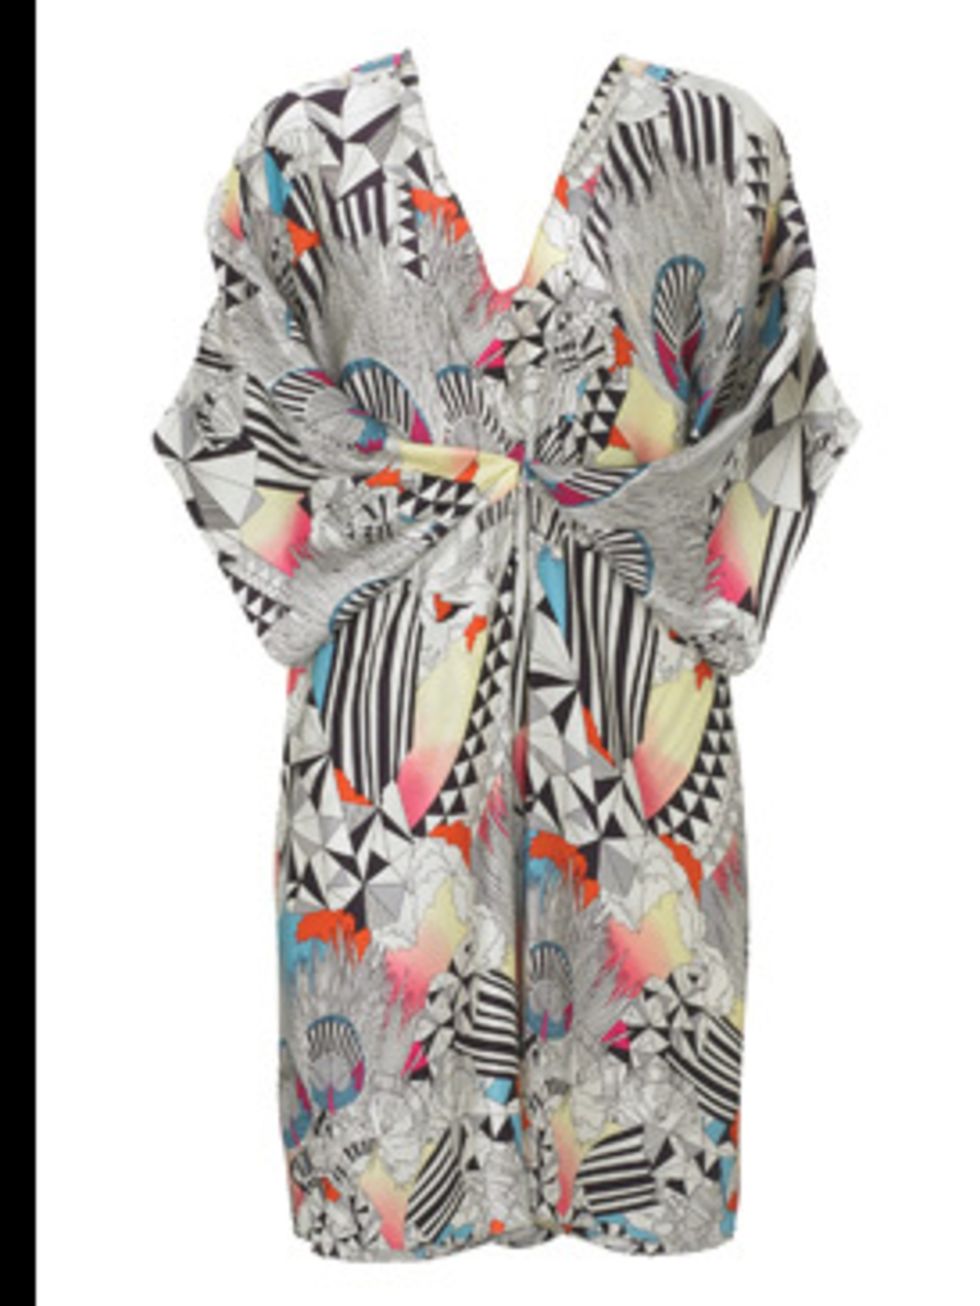 <p>Dress, £85 by <a href="http://www.oasis-stores.com/">Oasis</a></p>